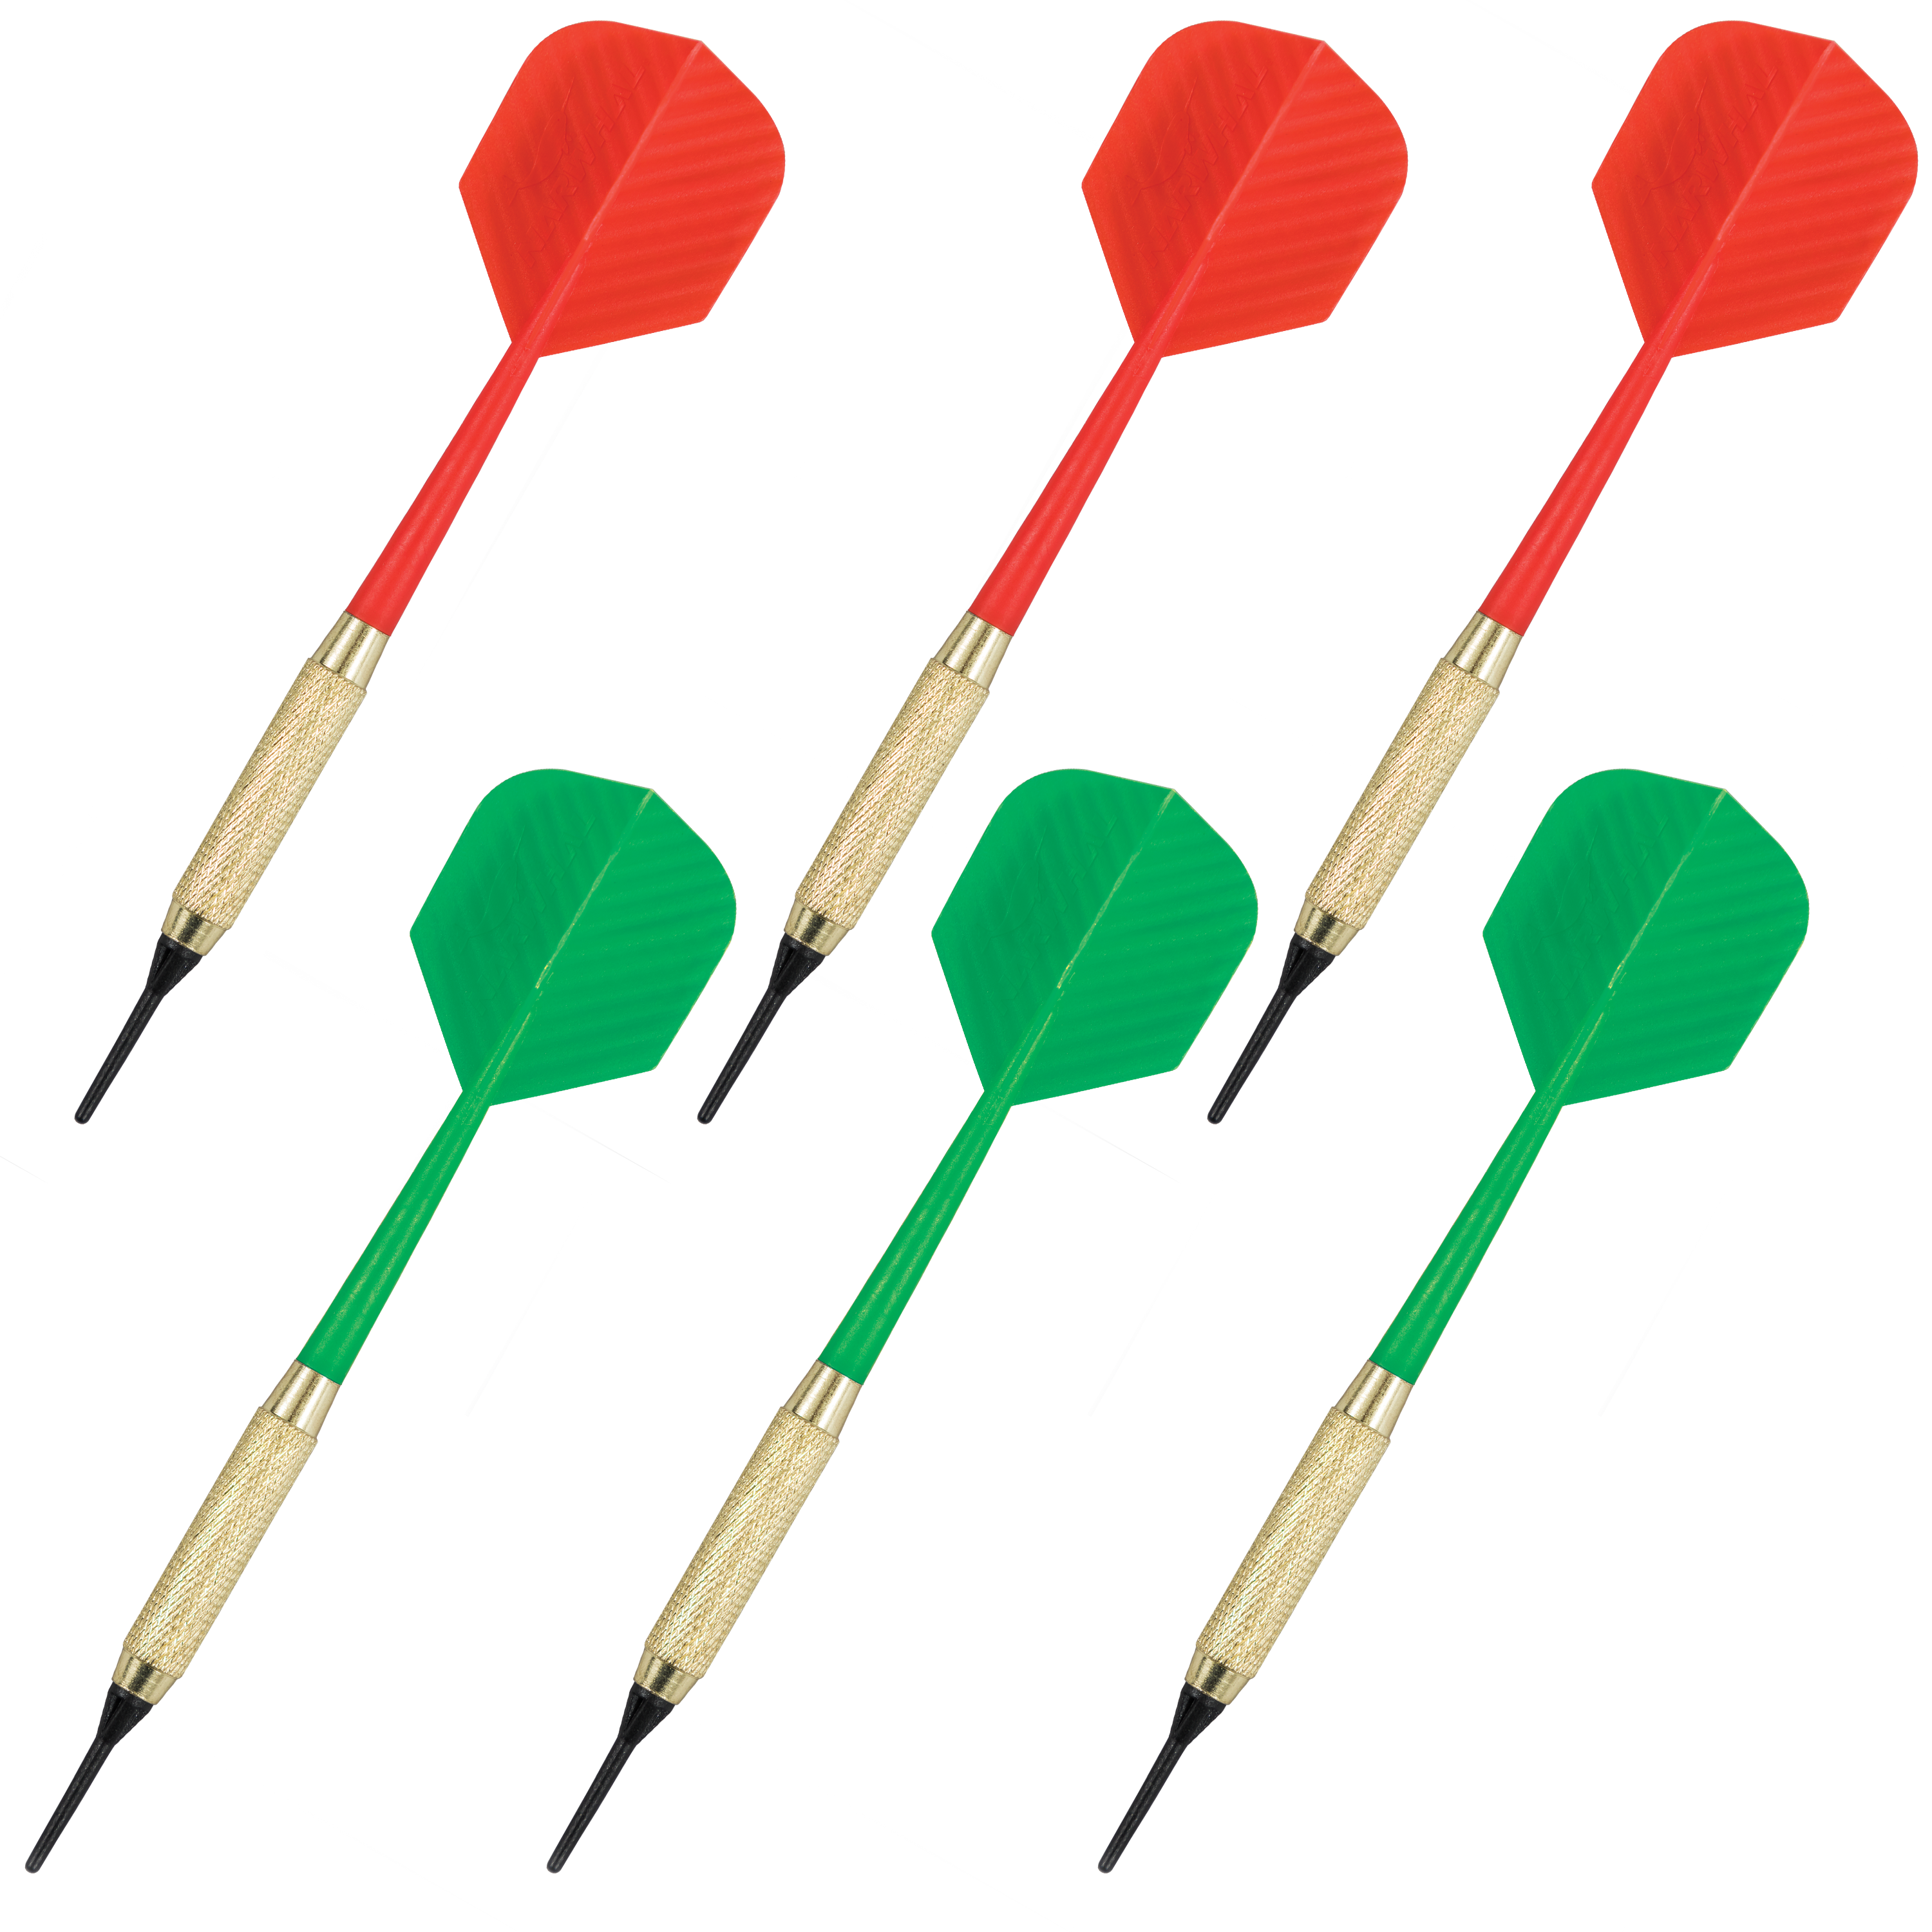 Darts Point PNG Images